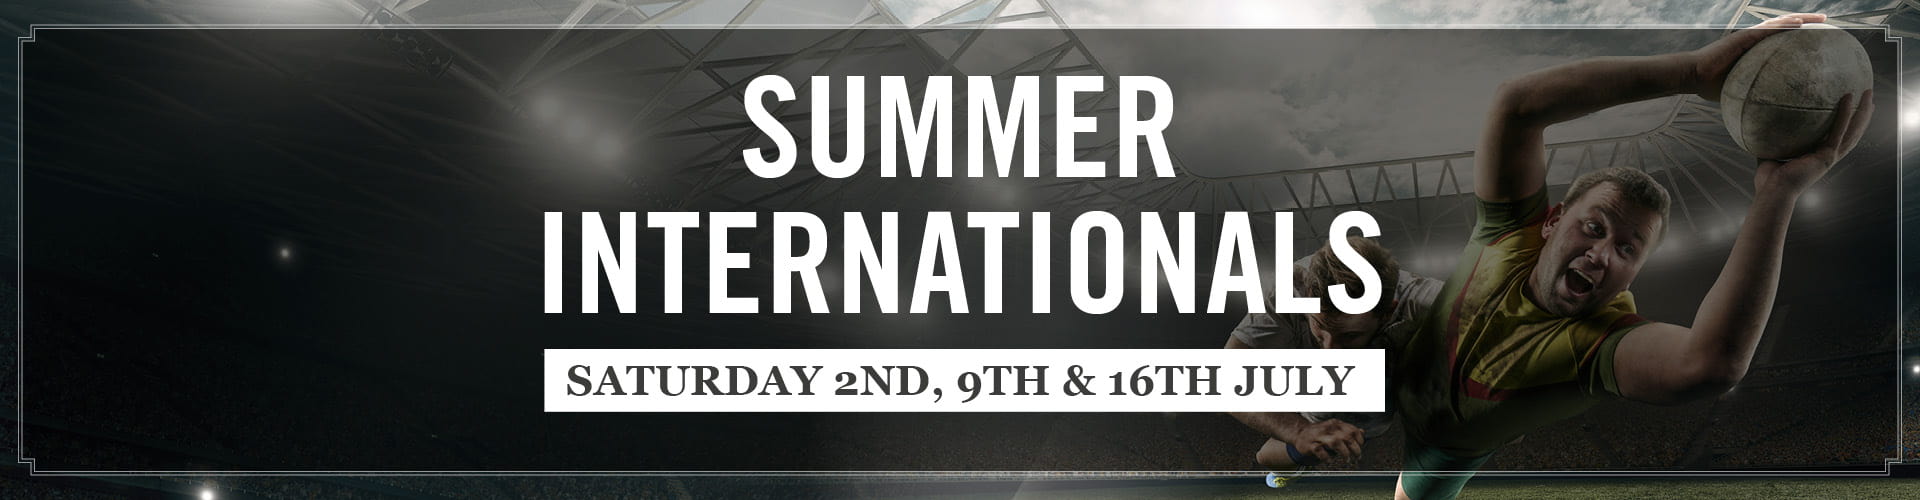 Watch Rugby Summer Internationals live at The Three Kings pub in London